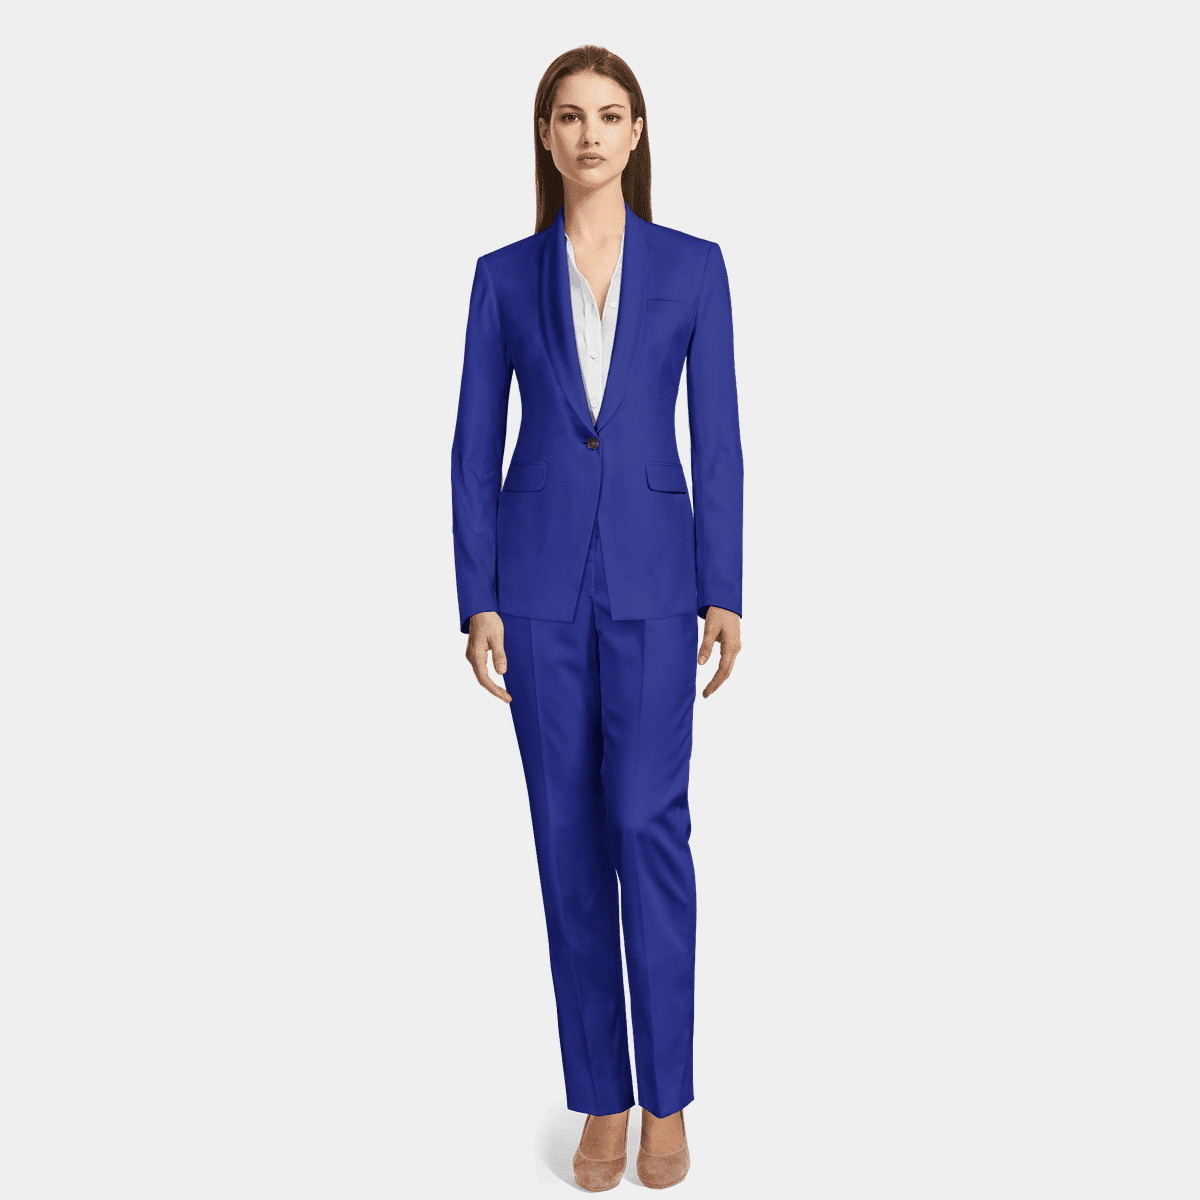 Royal Blue wool blend Woman Suit $509 | Sumissura